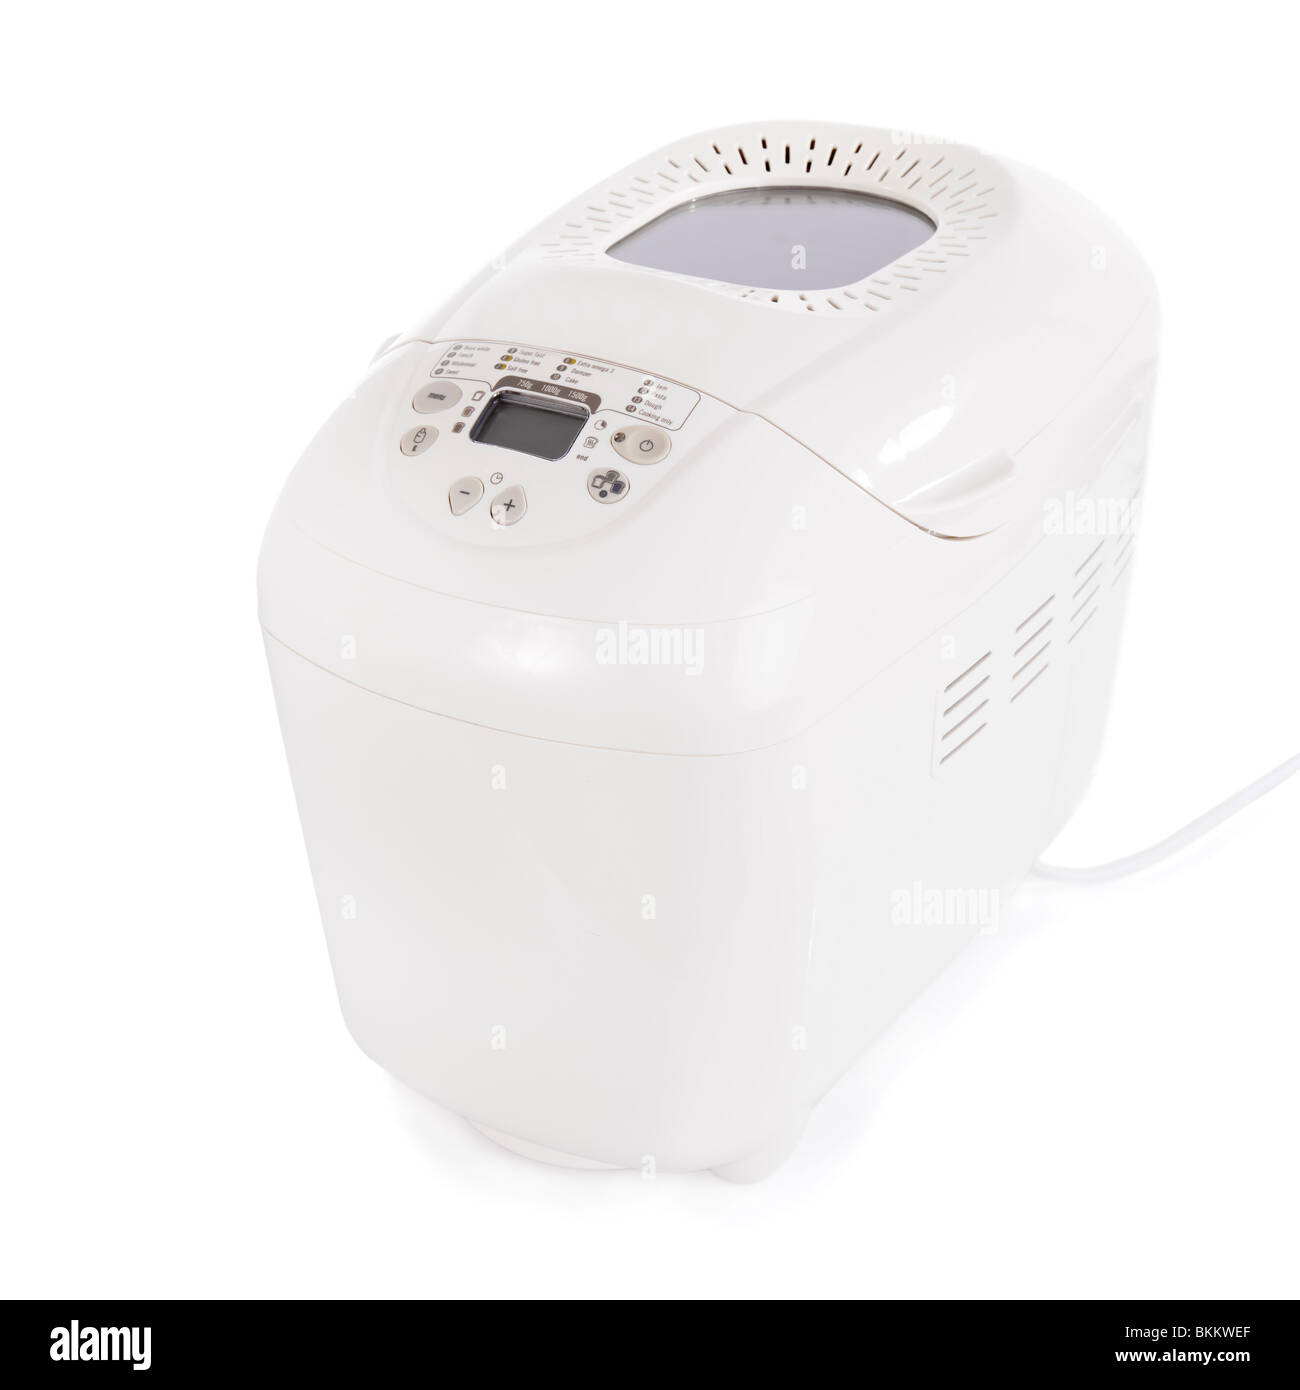 Breadmaker machine isolated on a white background Stock Photo